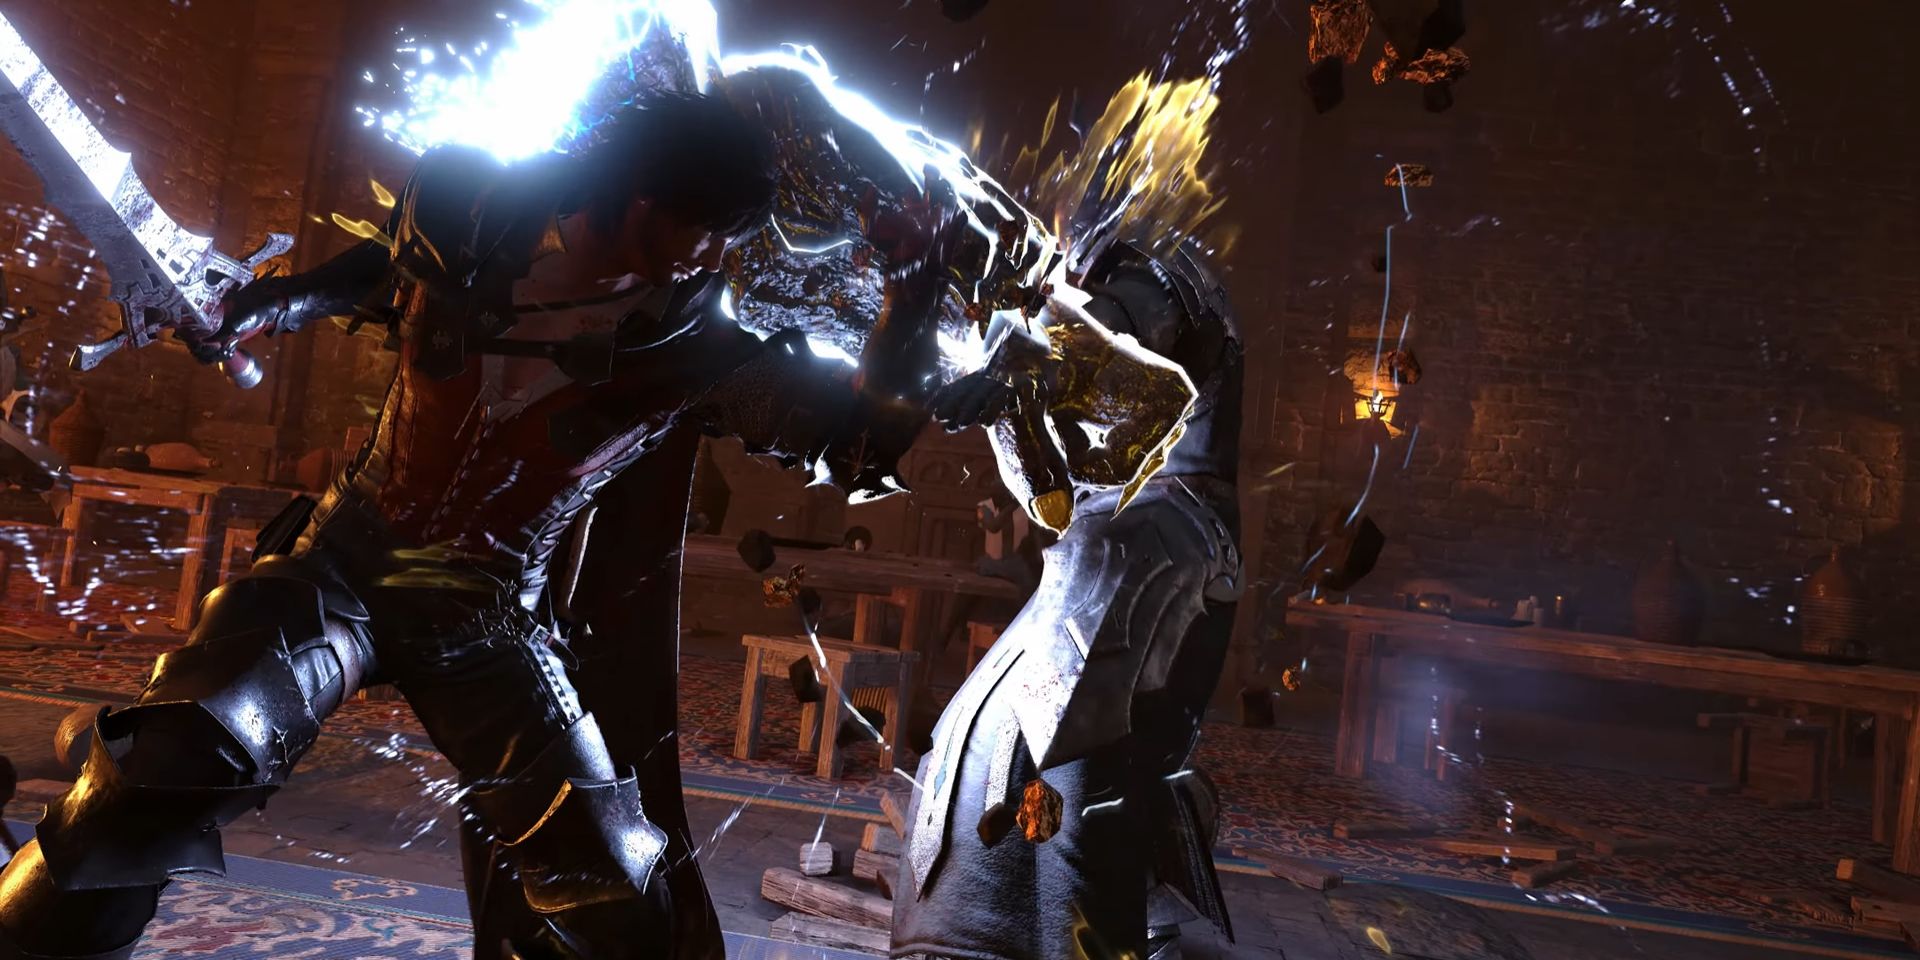 Clive engages an enemy in combat in Final Fantasy 16, appearing to cast a lightning spell.